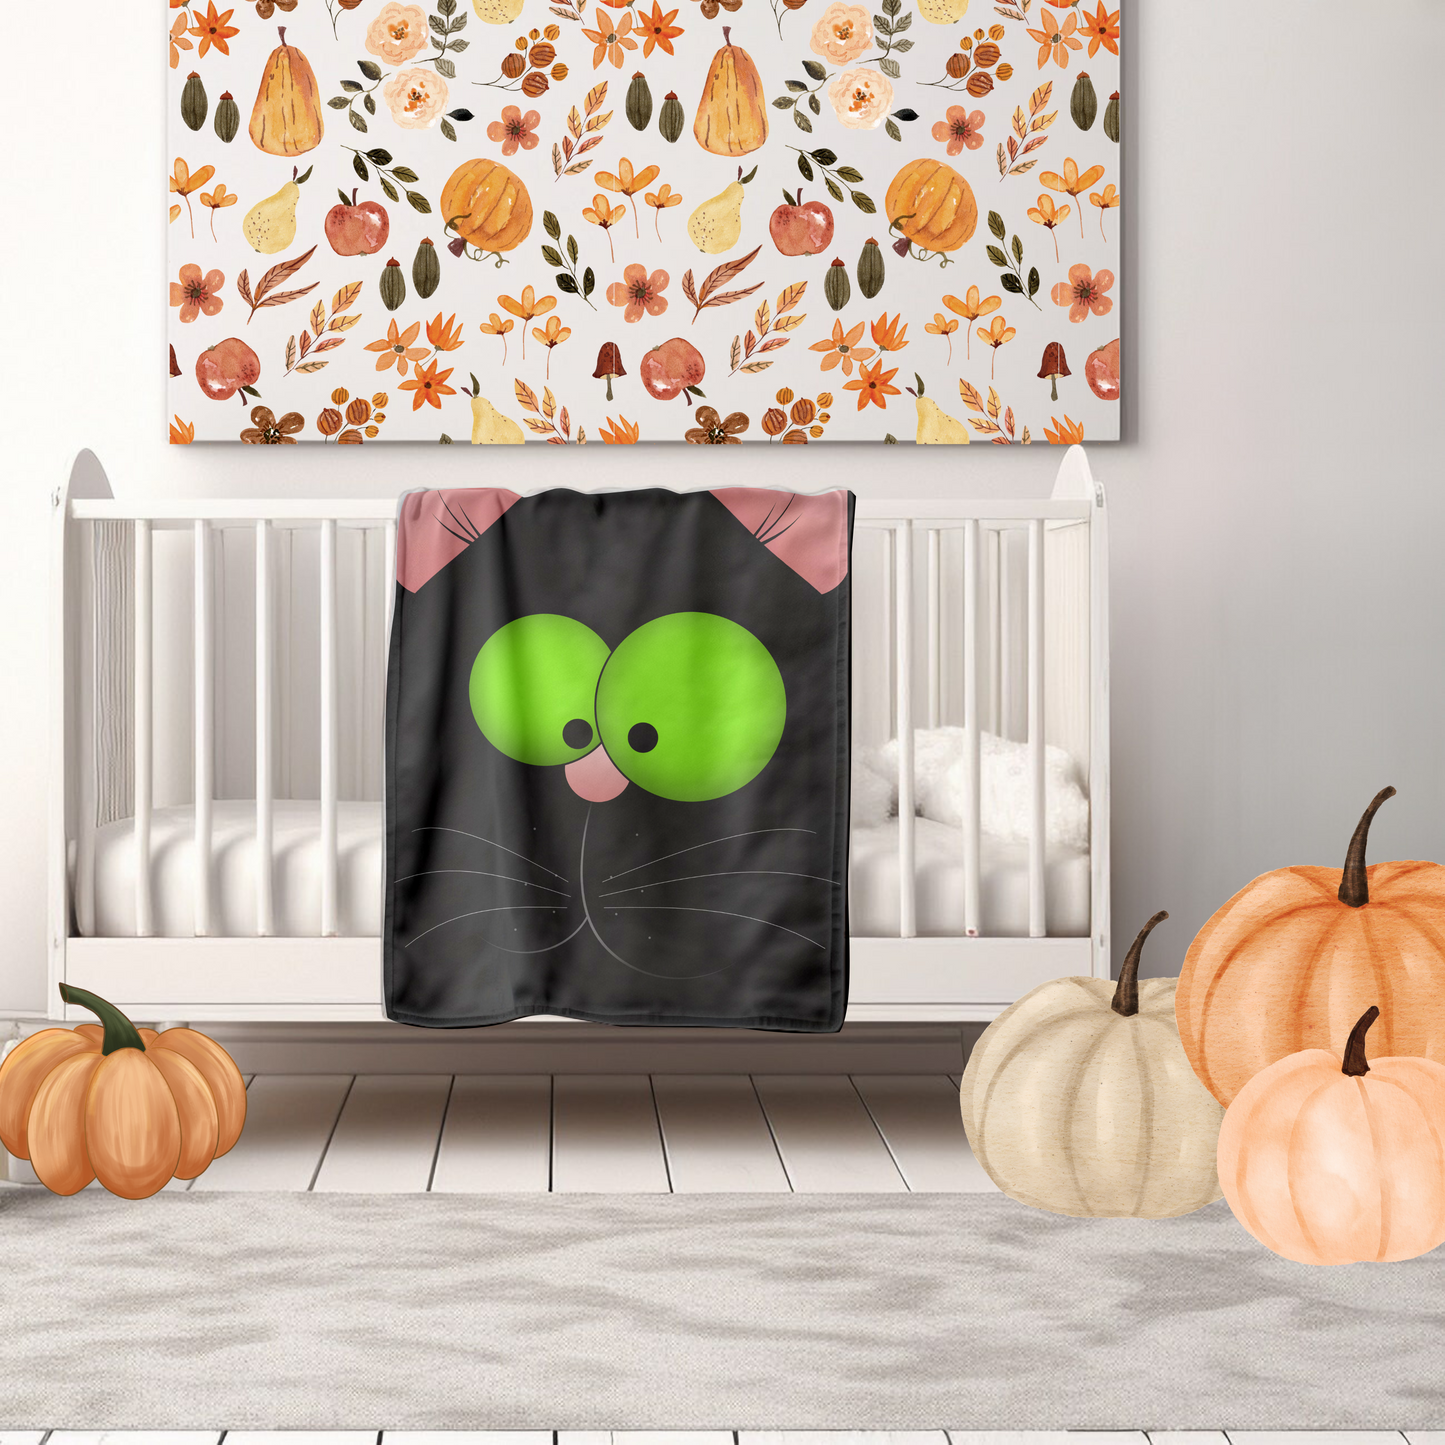 Blanket - Halloween Silly Faces - Black Cat